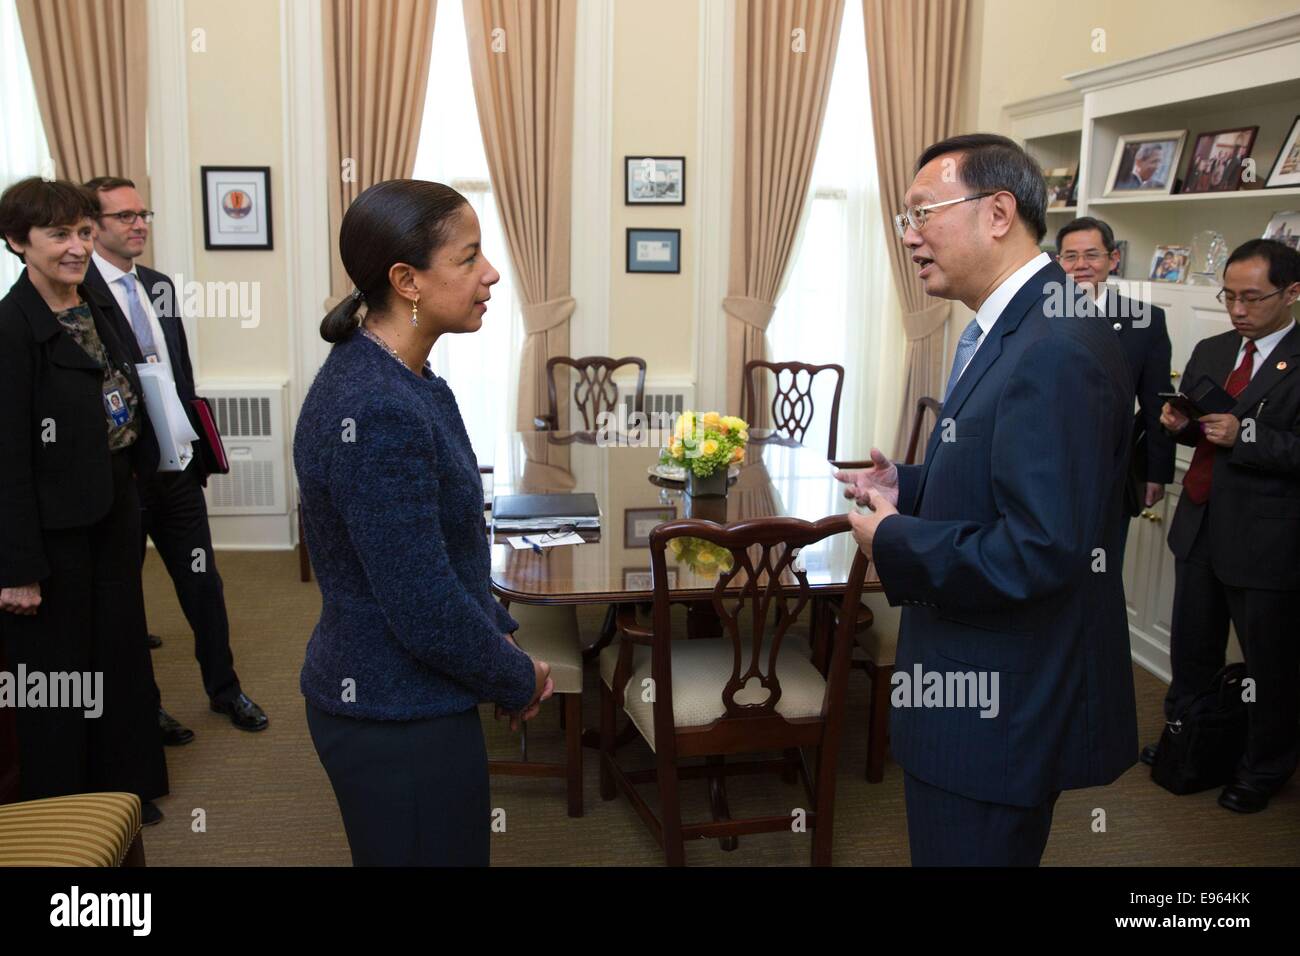 Washington, DC, USA. 21st Oct, 2014. Chinese State Councilor Yang Jiechi (R) meets with U.S. President Barack Obama's National Security Advisor Susan Rice in Washington, DC, the United States, Oct. 20, 2014. © Xinhua/Alamy Live News Stock Photo